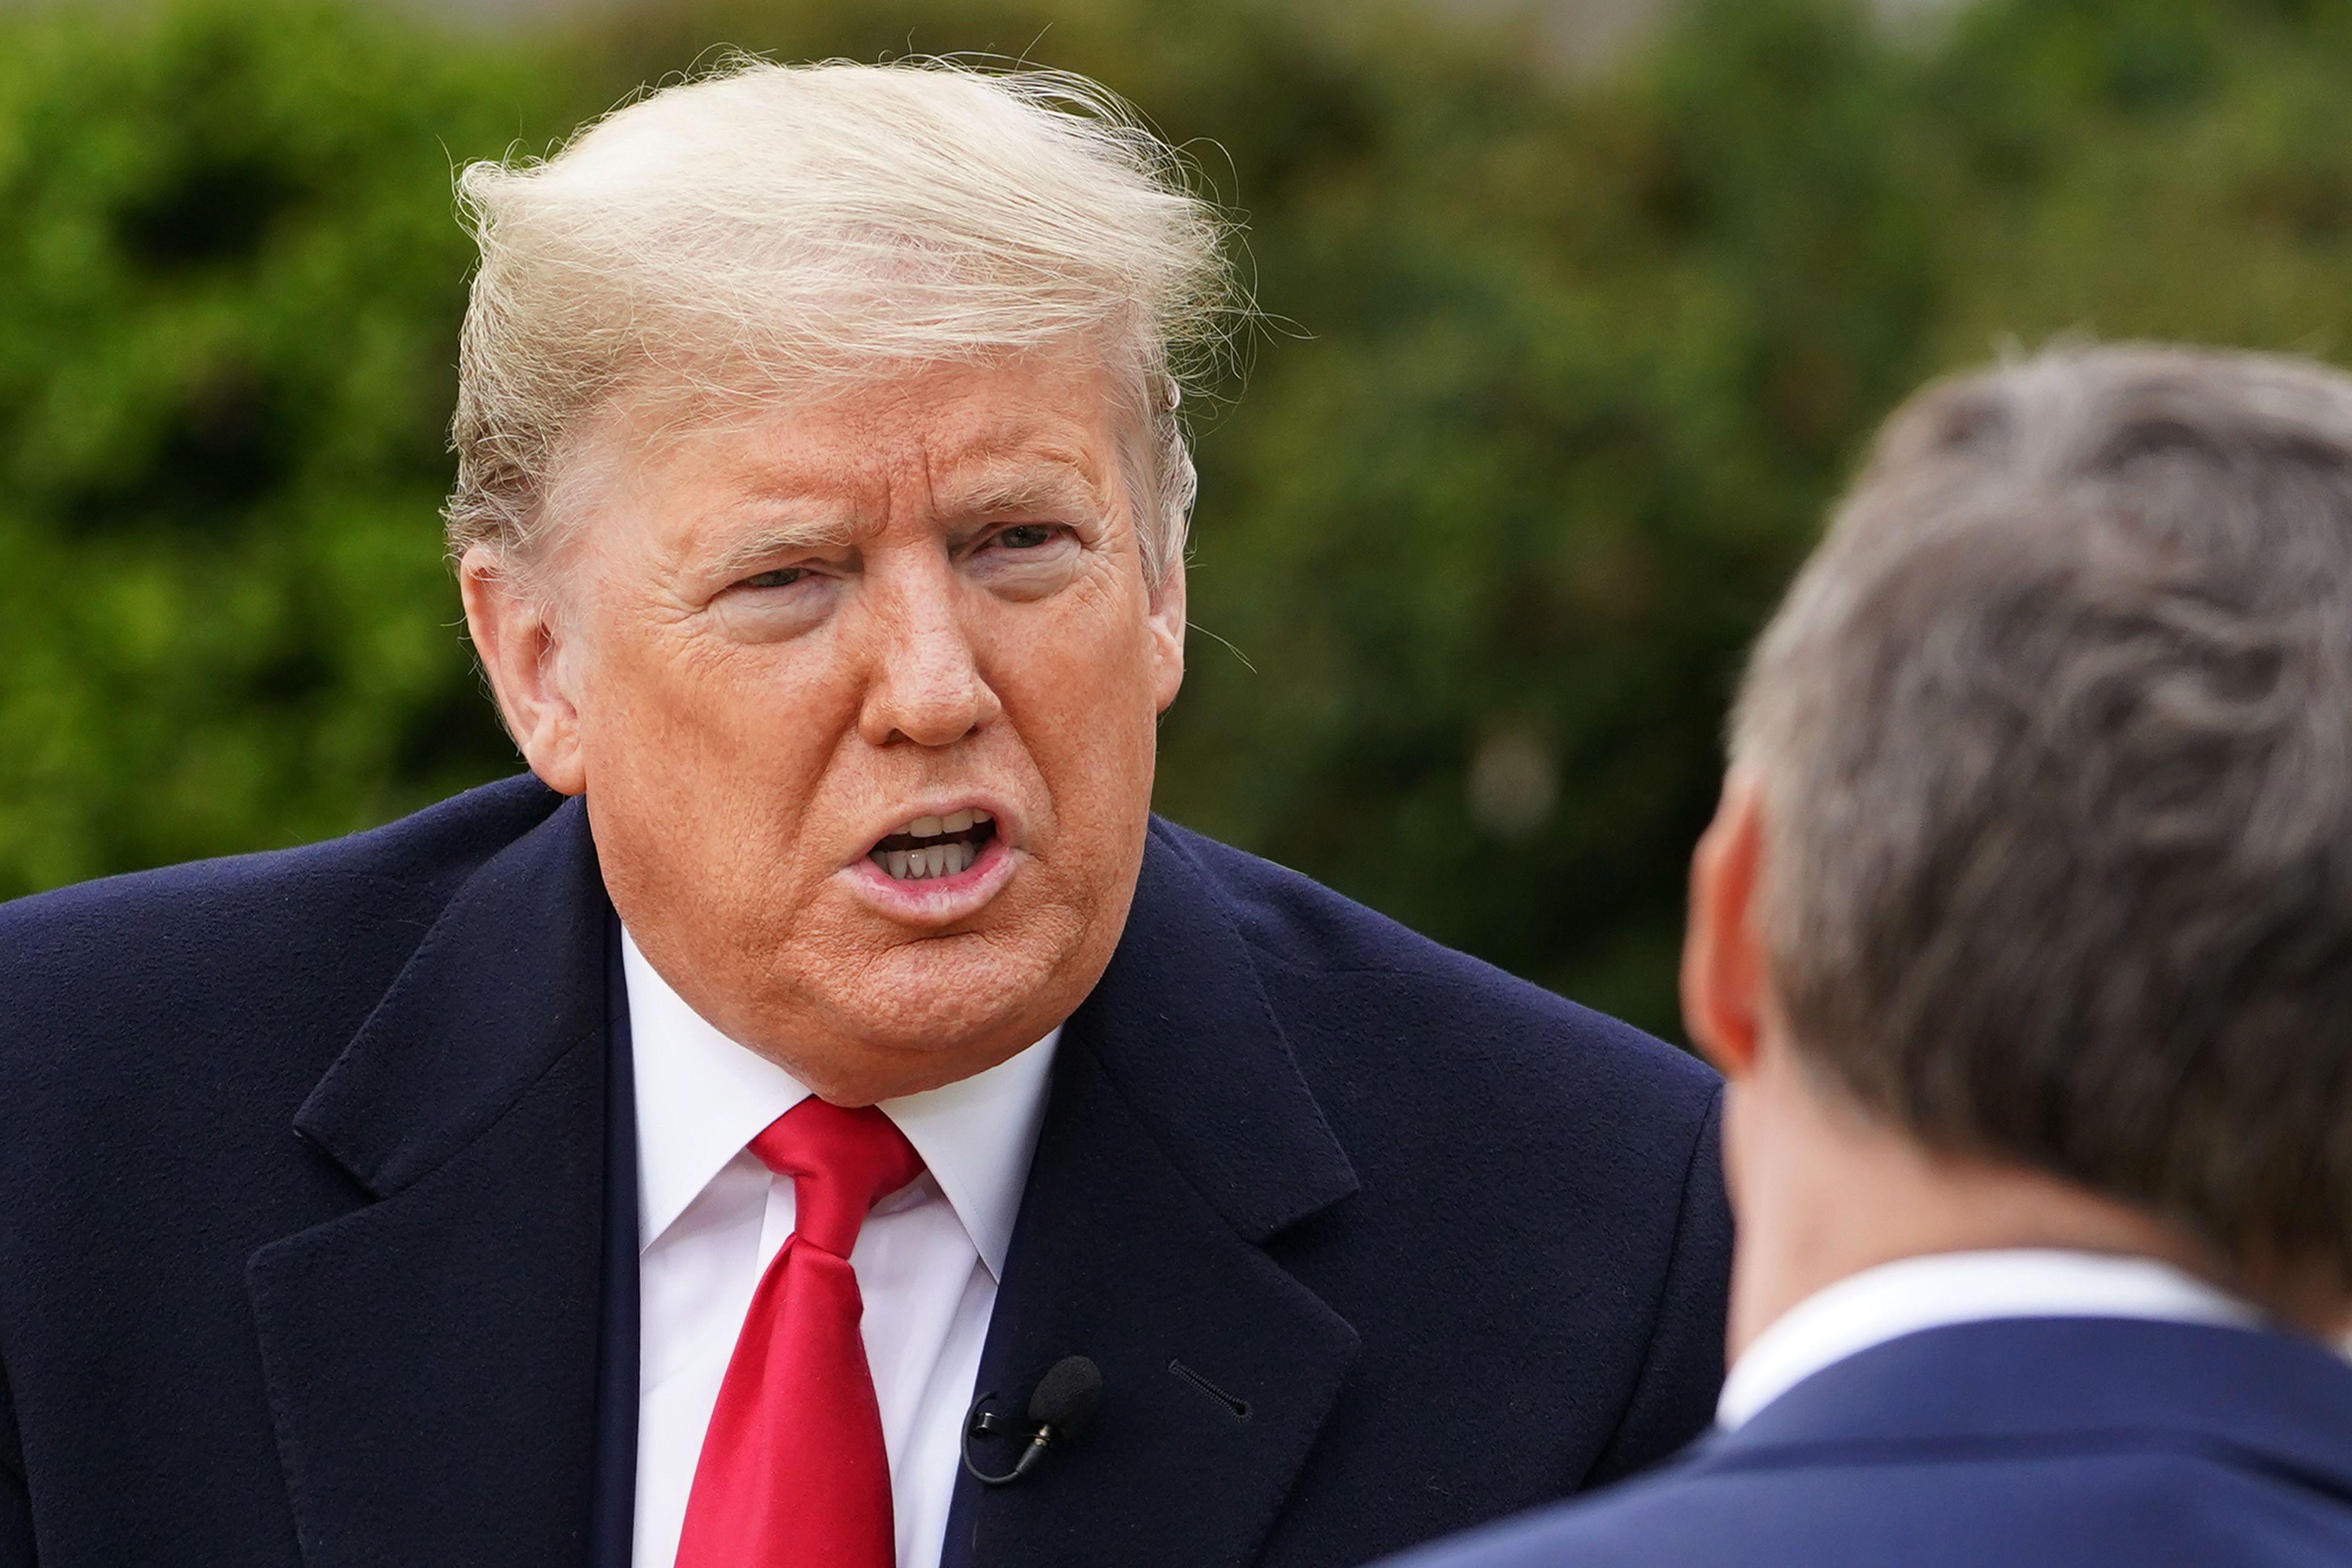 US President Donald Trump speaks with anchor Bill Hemmer during a Fox News virtual town hall meeting from the Rose Garden of the White House in Washington, D.C.